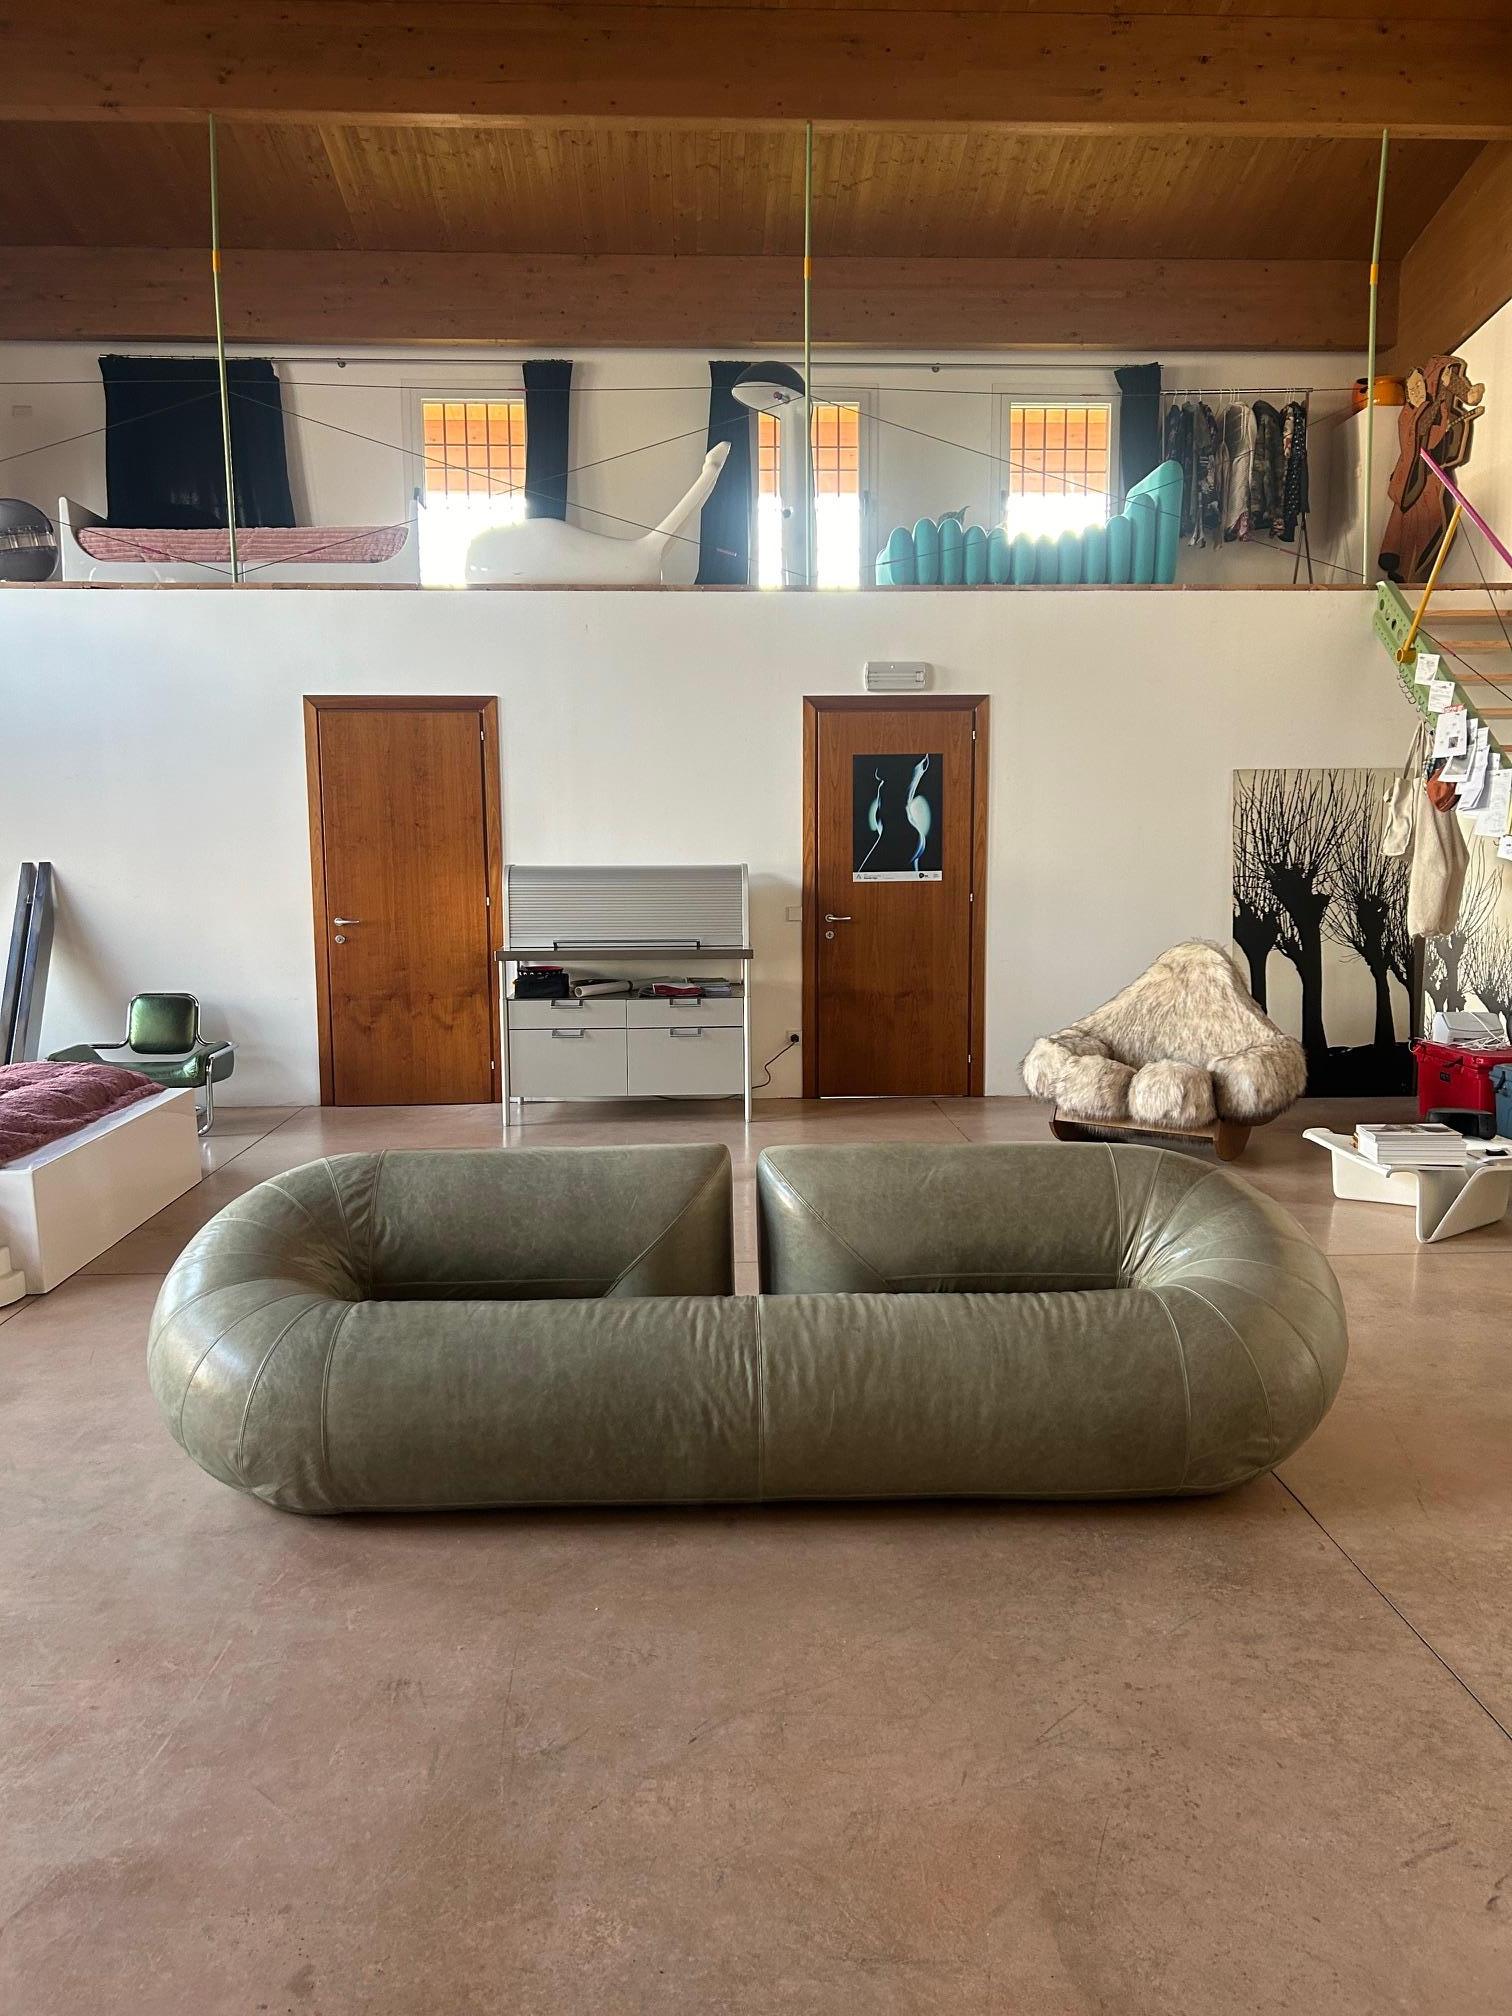 Rare Zeppelin sofa designed by Walter Leeman in the seventies for Velda. The sofa, thanks to its monumental dimensions and seamless tubular structure, makes it sculptural and predominant in any environment. The sage green leather upholstery is of